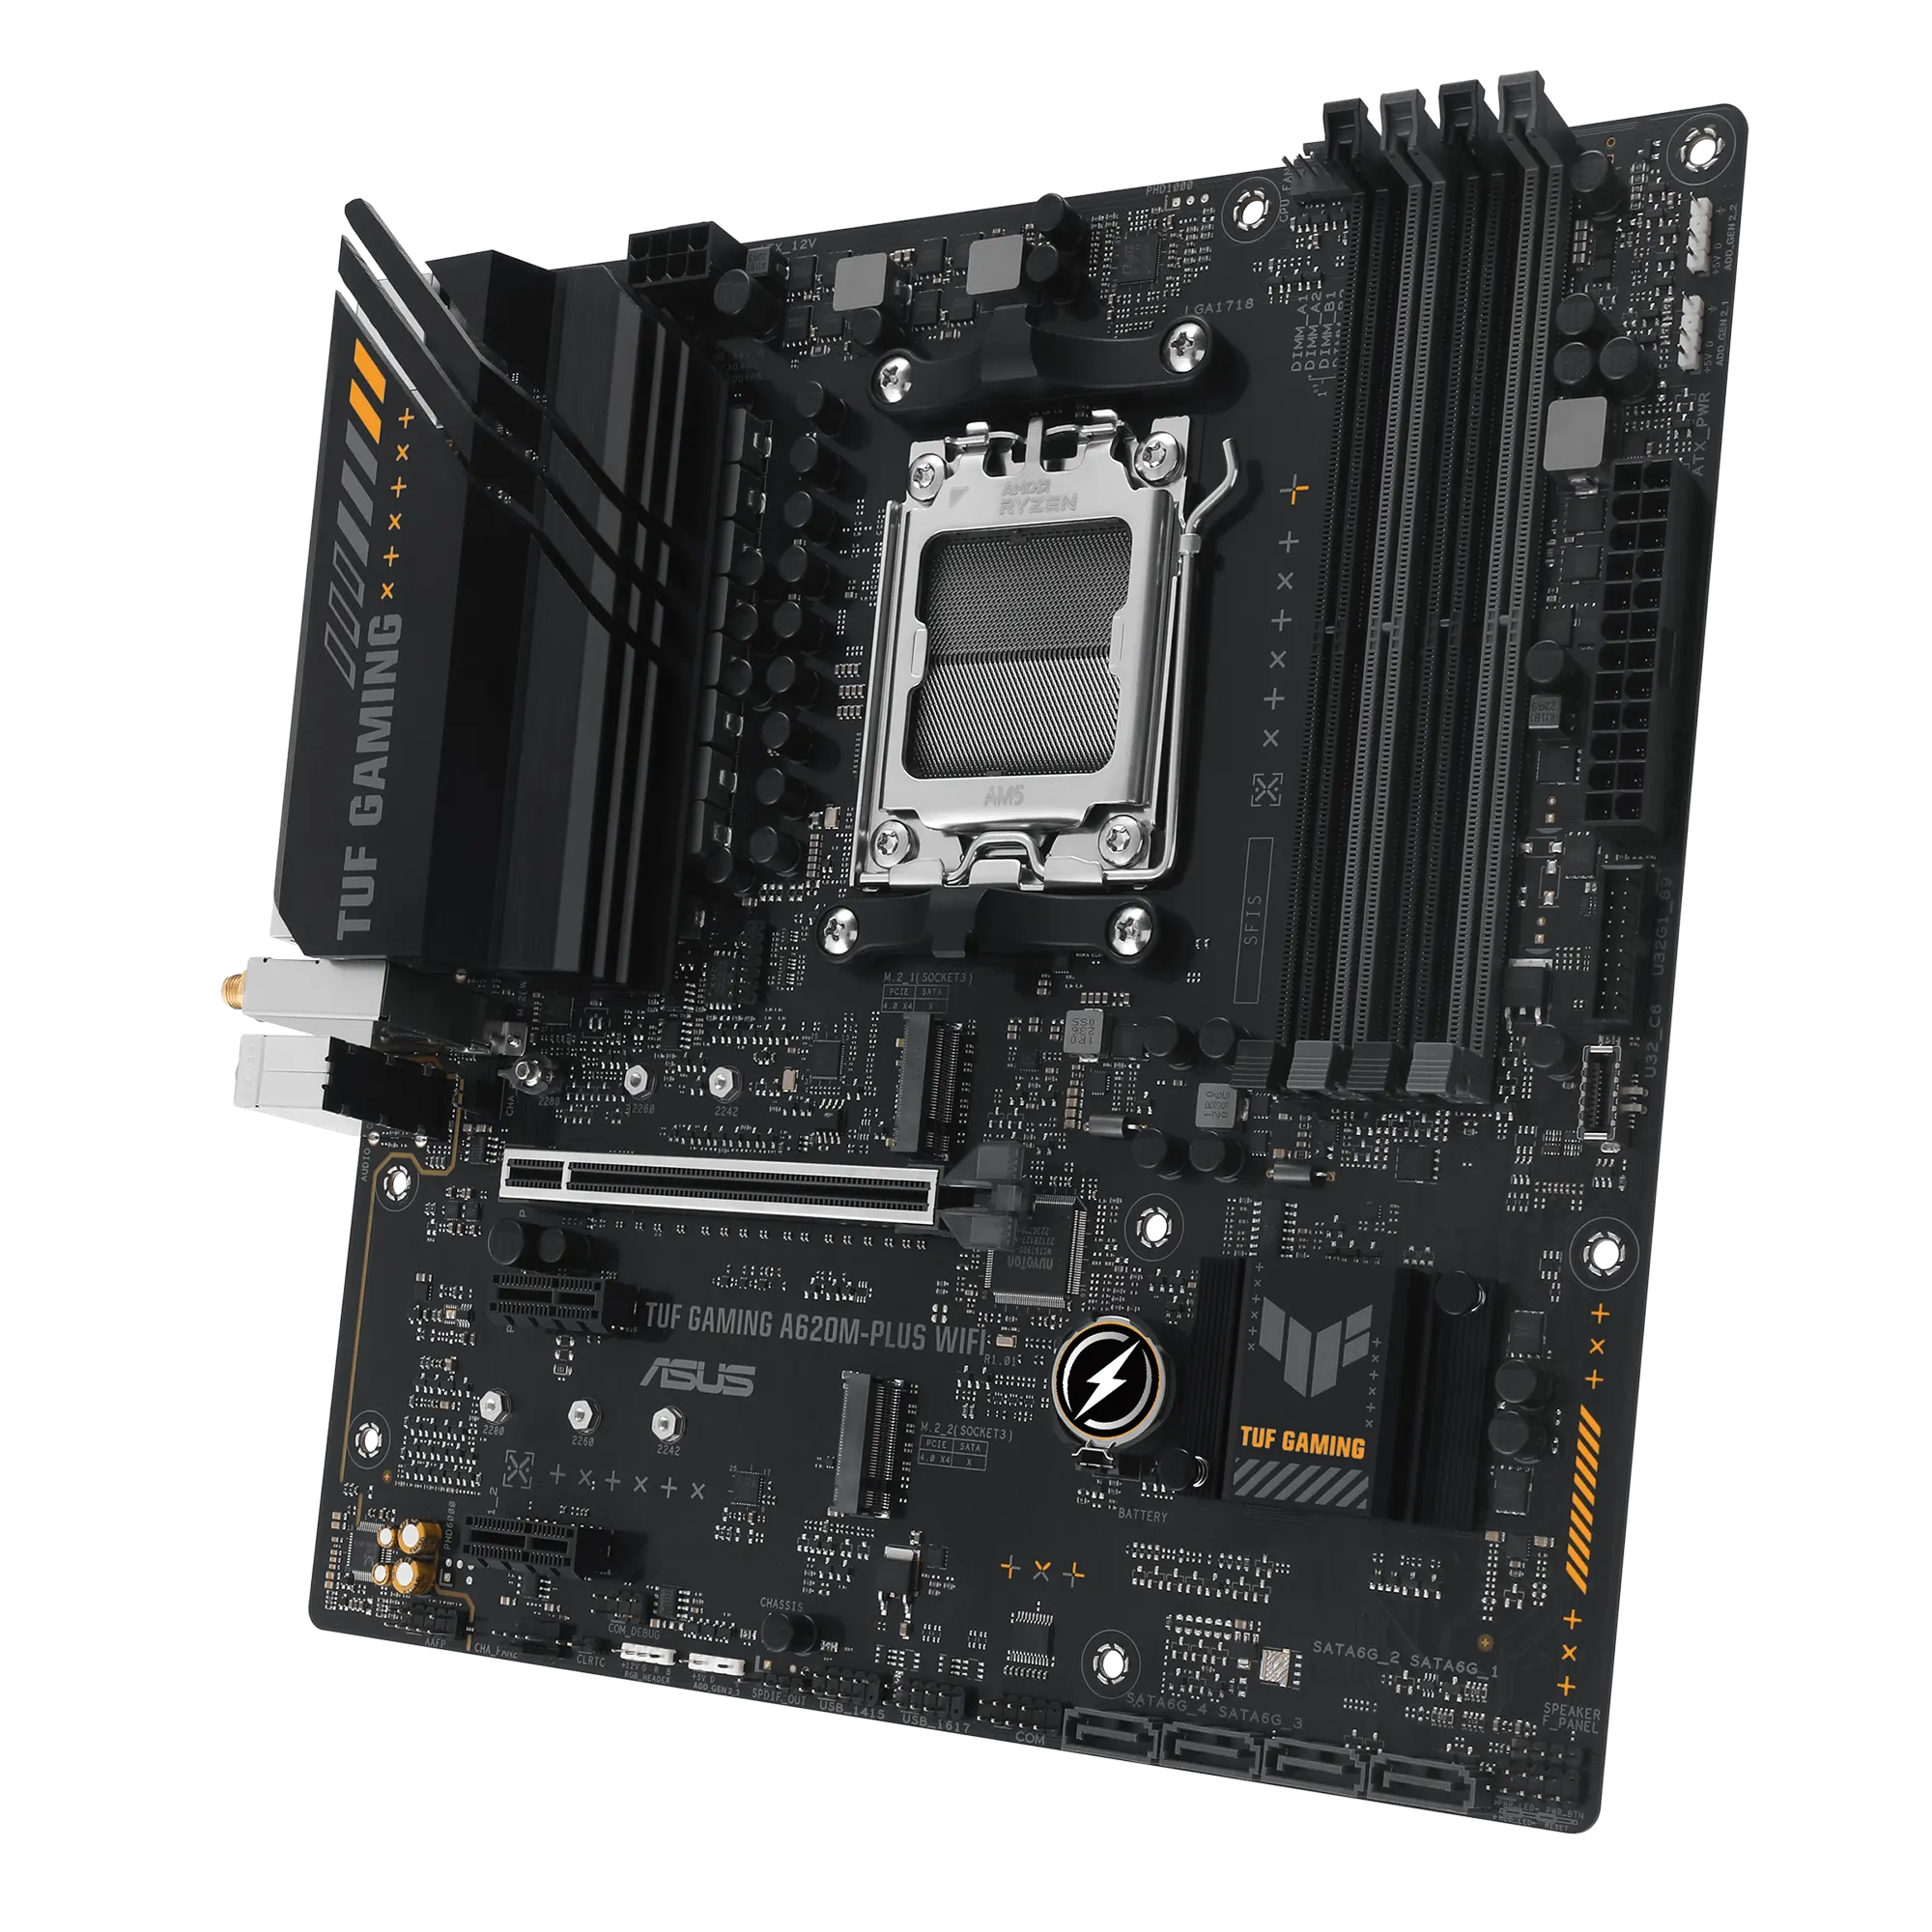 TUF Gaming motherboard’s photo